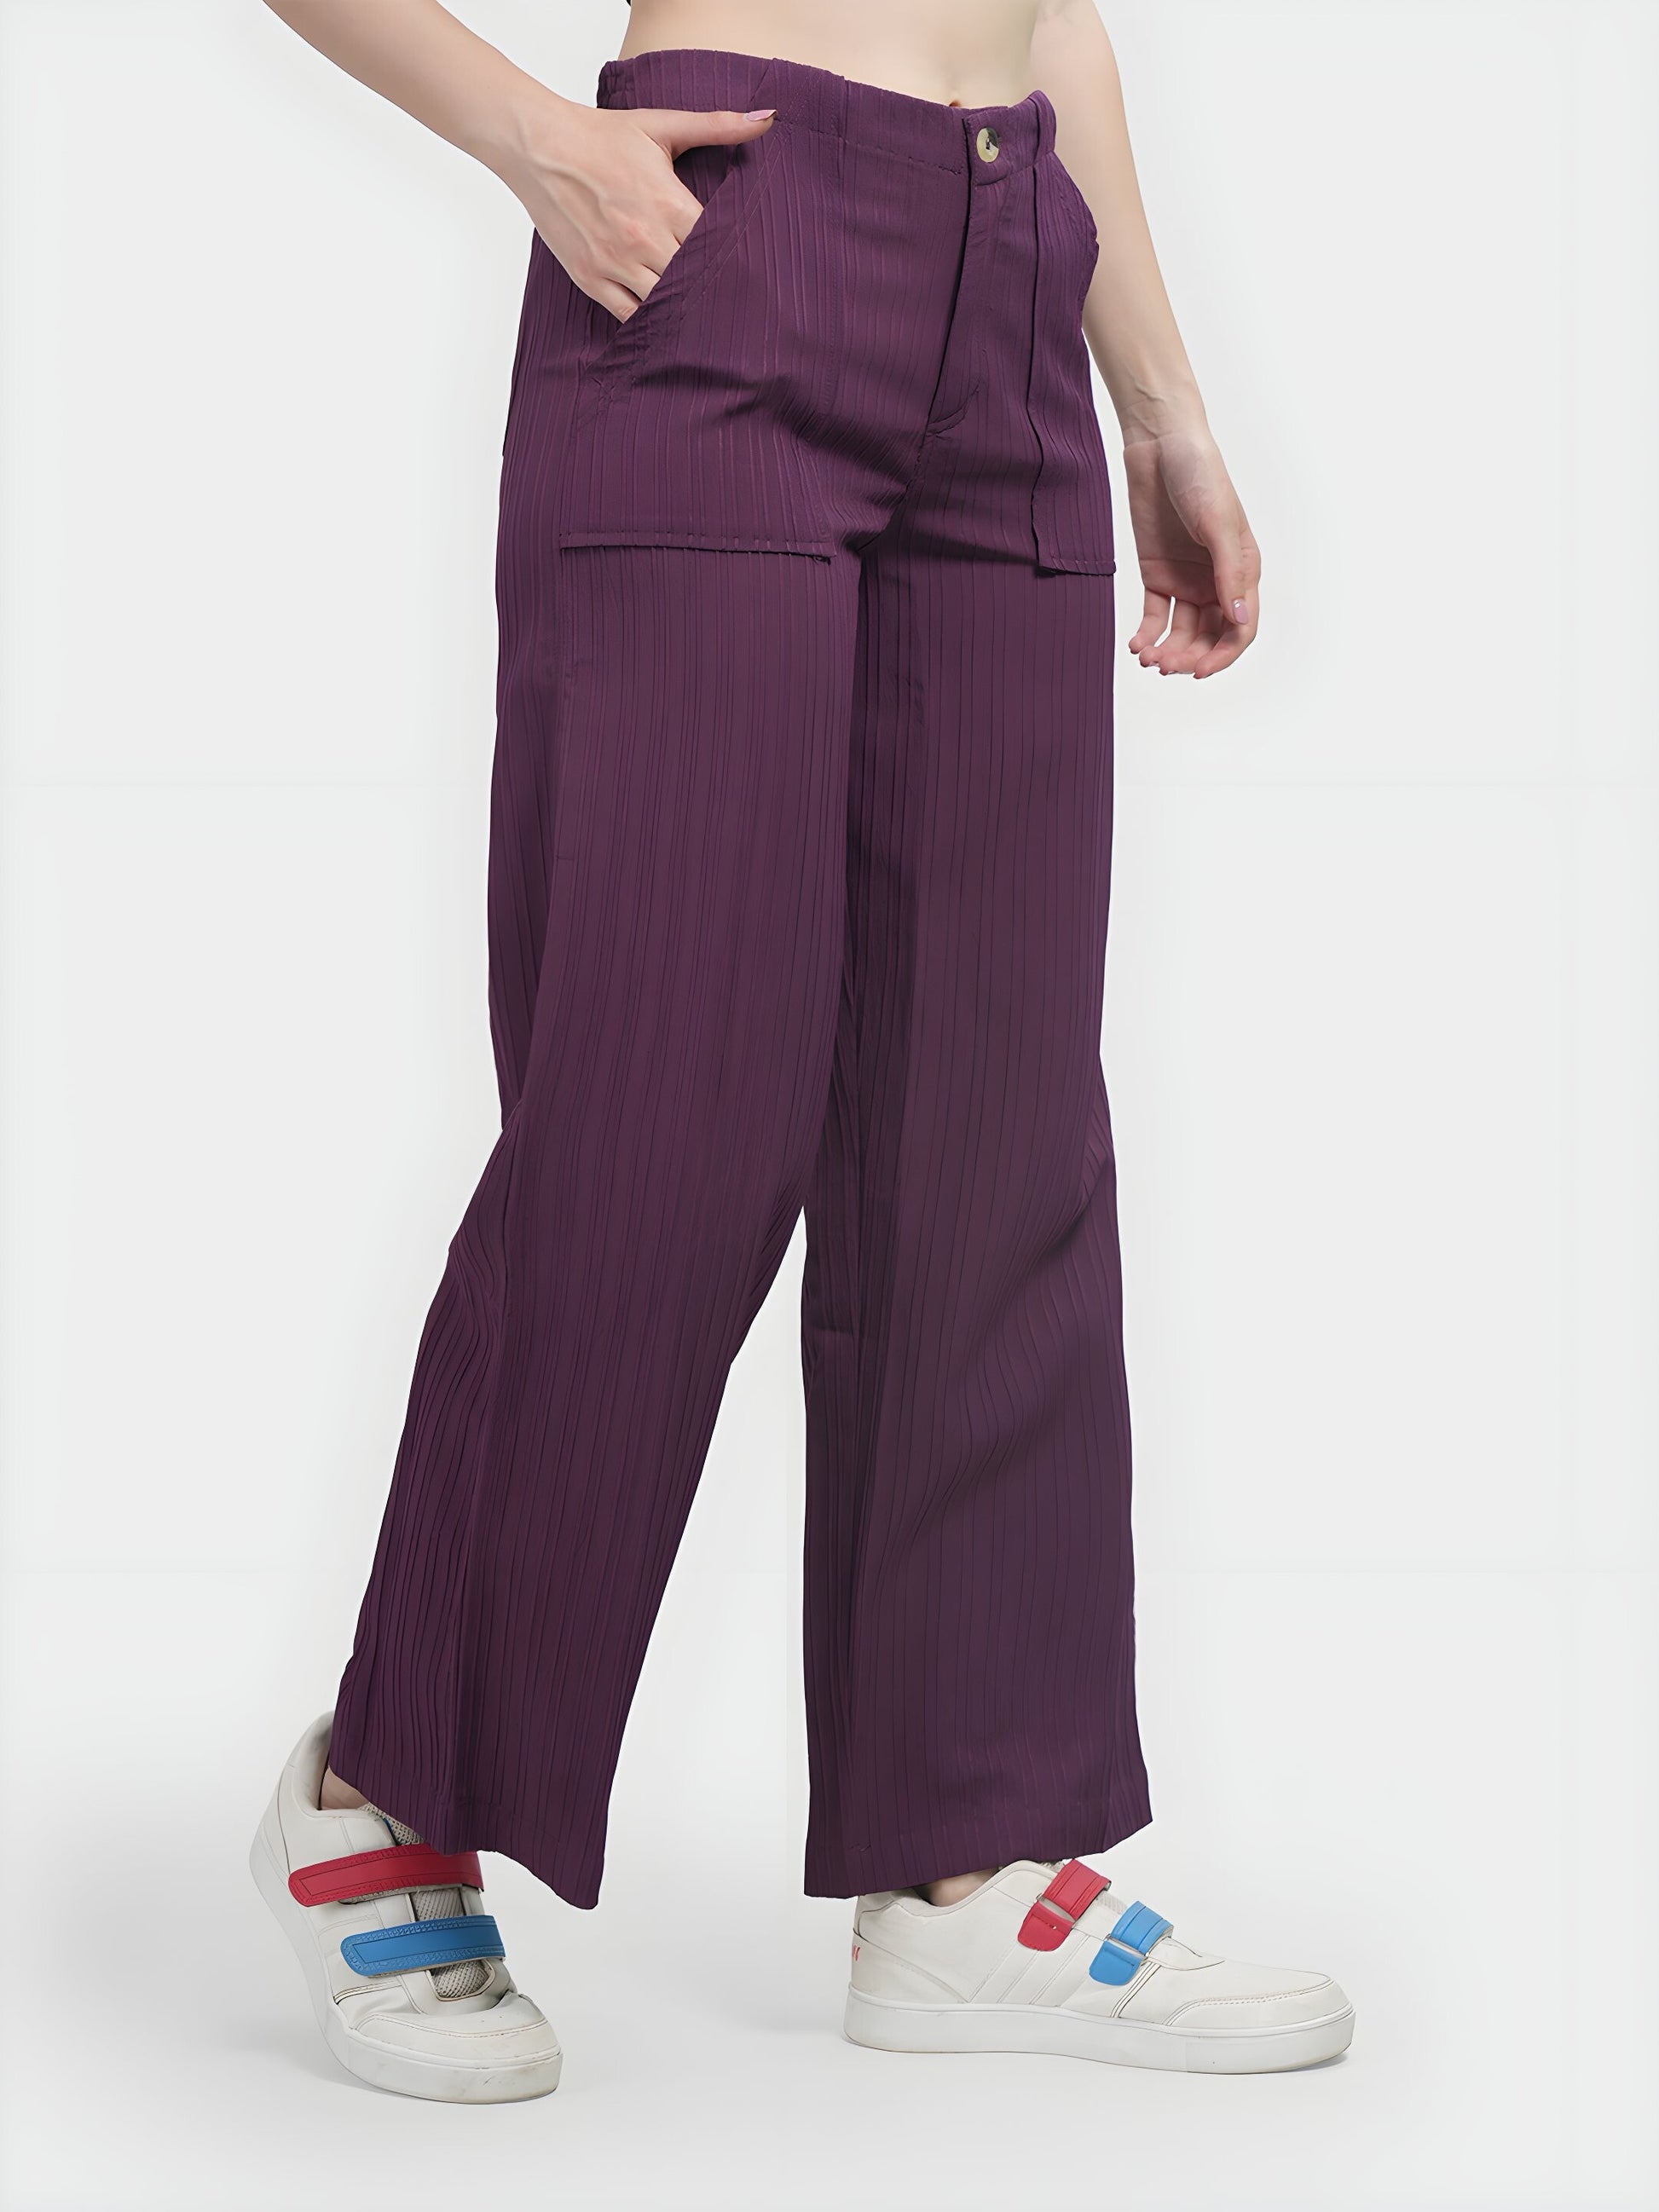 Purple Colour | Women Formal Trousers Being Flawless